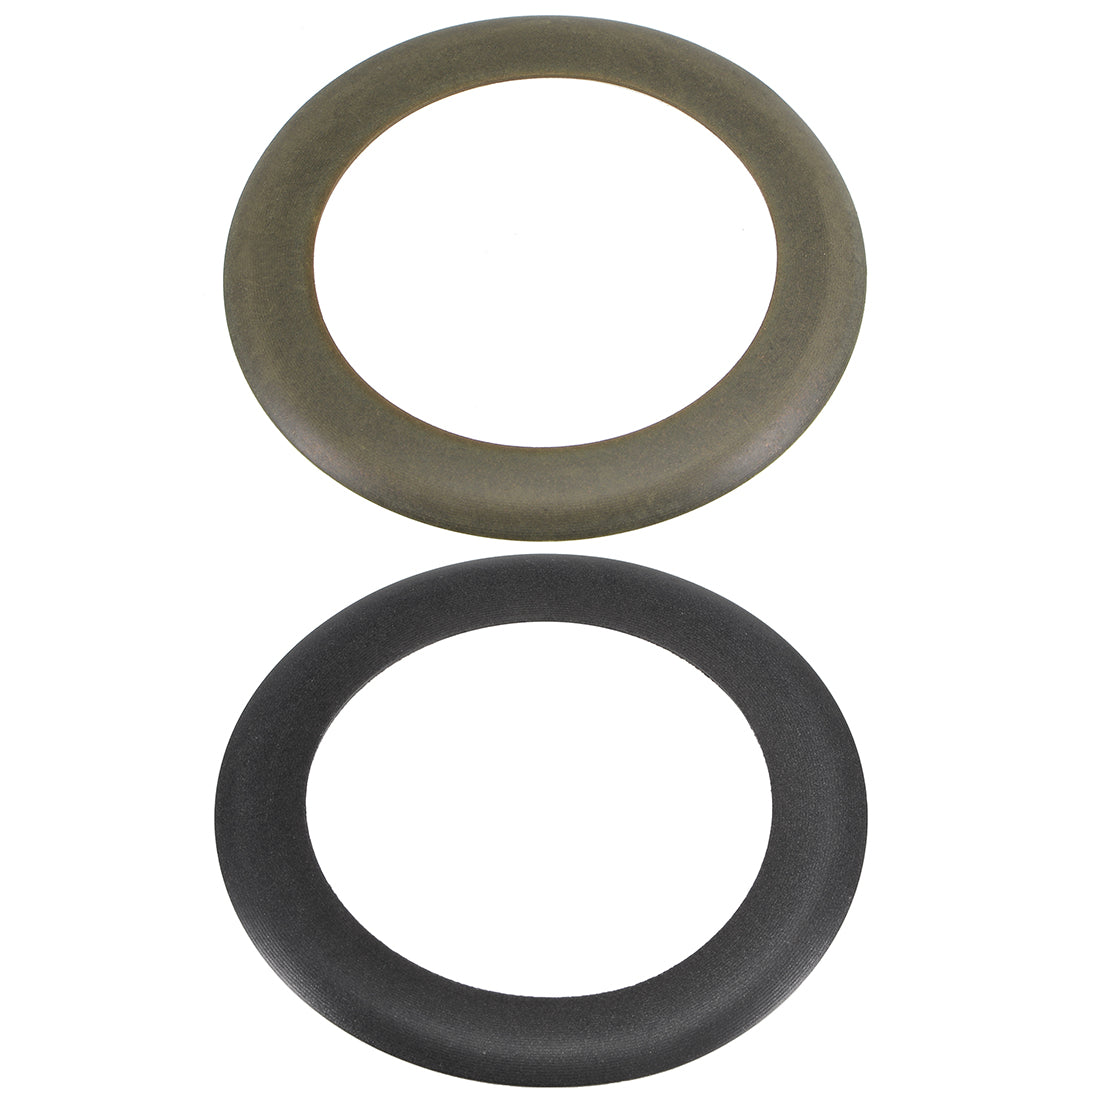 Uxcell Uxcell Air Compressor Compression Piston Ring Replacement Part 67.4mm OD 48mm ID 0.8mm Thickness, Dark Gray, 2Pcs